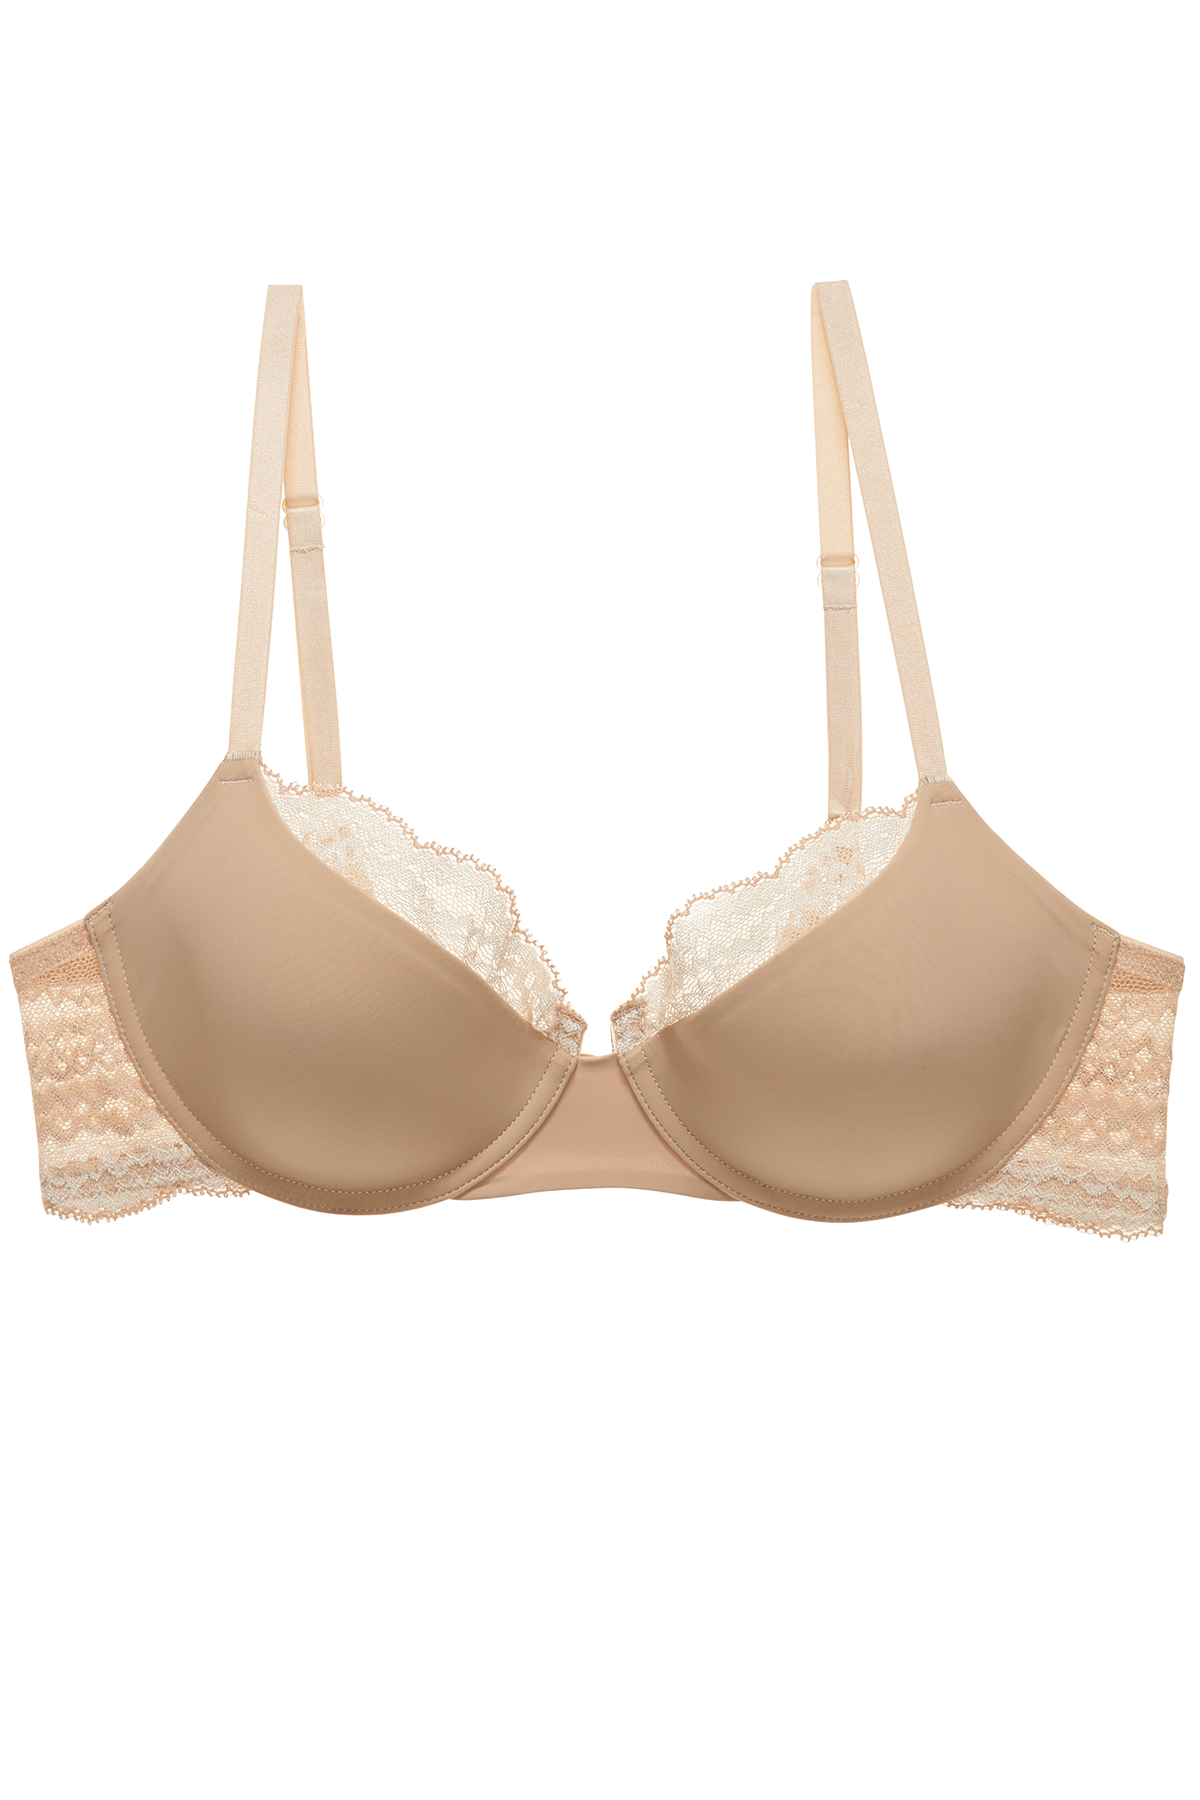 NEW IN: Timeless ivory lace - Bras N Things Email Archive